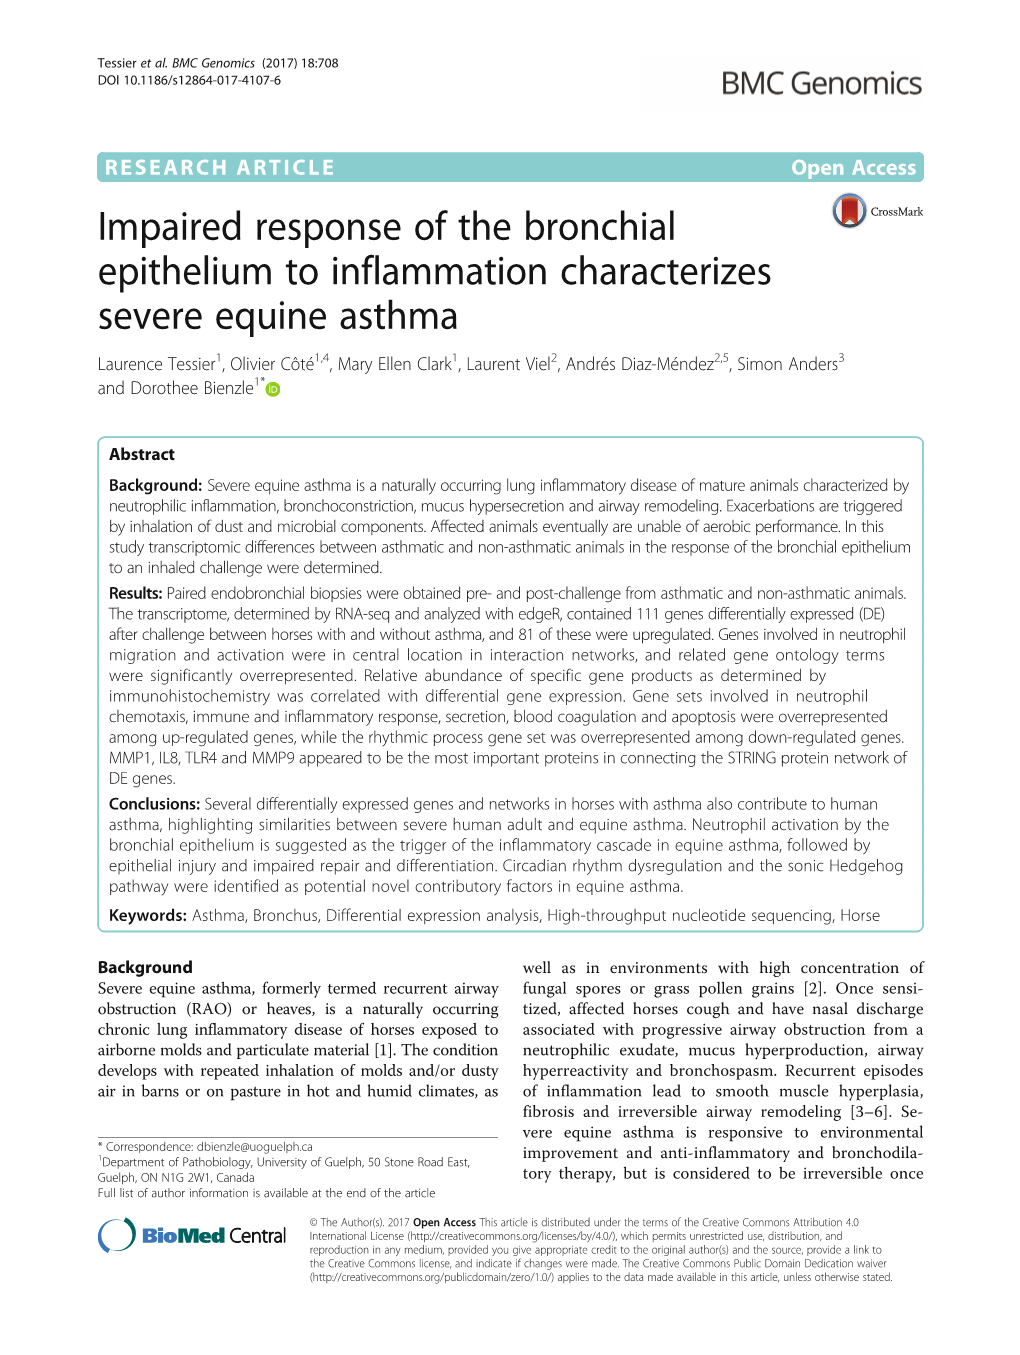 Impaired Response of the Bronchial Epithelium to Inflammation